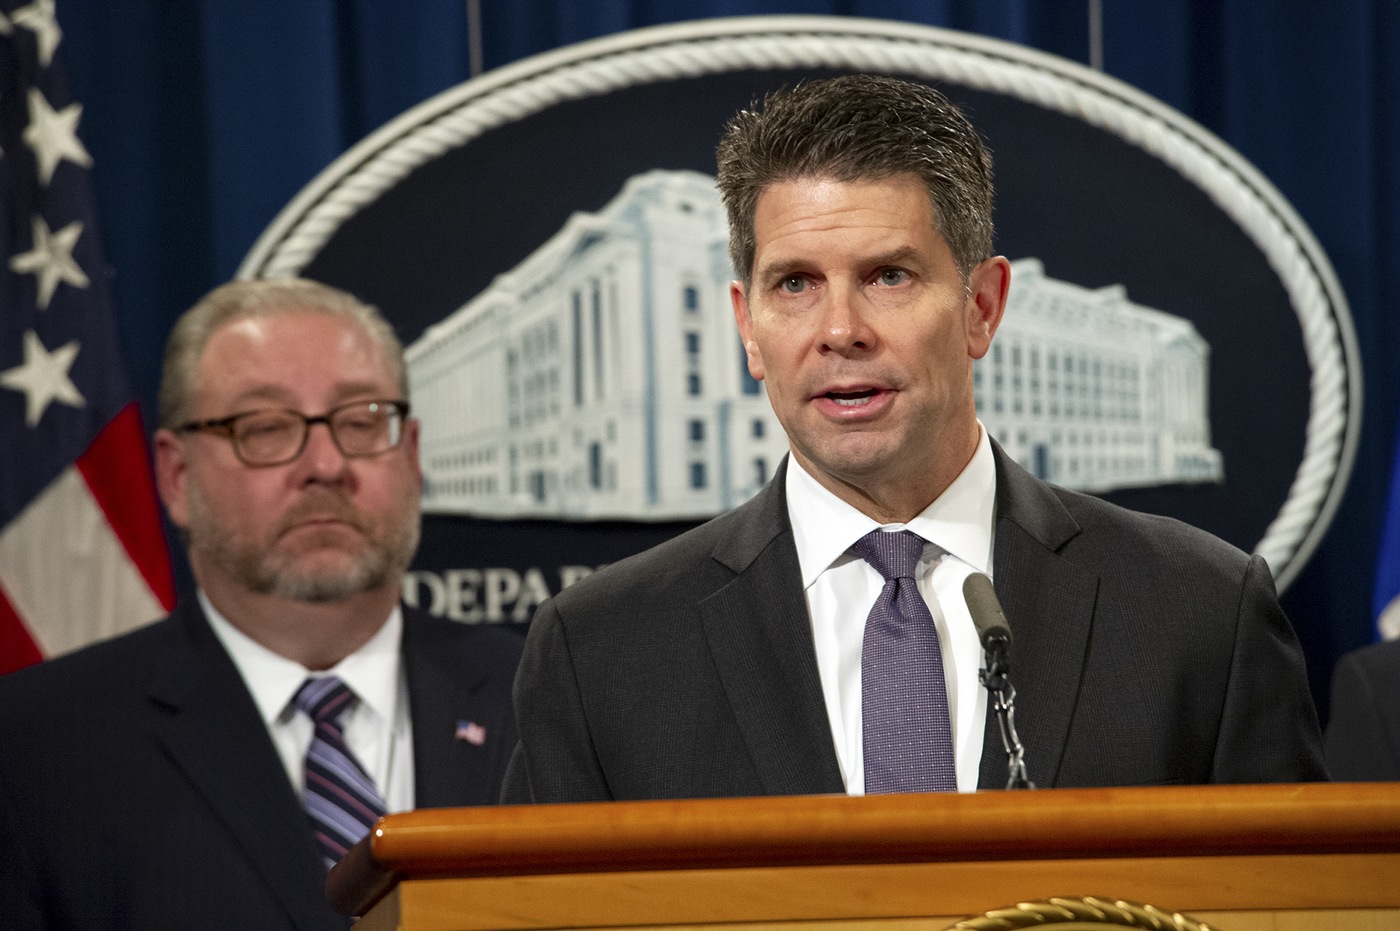 The U.S. Department of Justice today joined with the U.S. Department of State and the United Kingdom’s National Crime Agency in charging two Russian nationals with conspiracy to commit fraud, wire fraud, and bank fraud among other charges associated with a vast and long-running Cybercrime spree that stole from thousands of individuals and organizations in the United States and Europe.